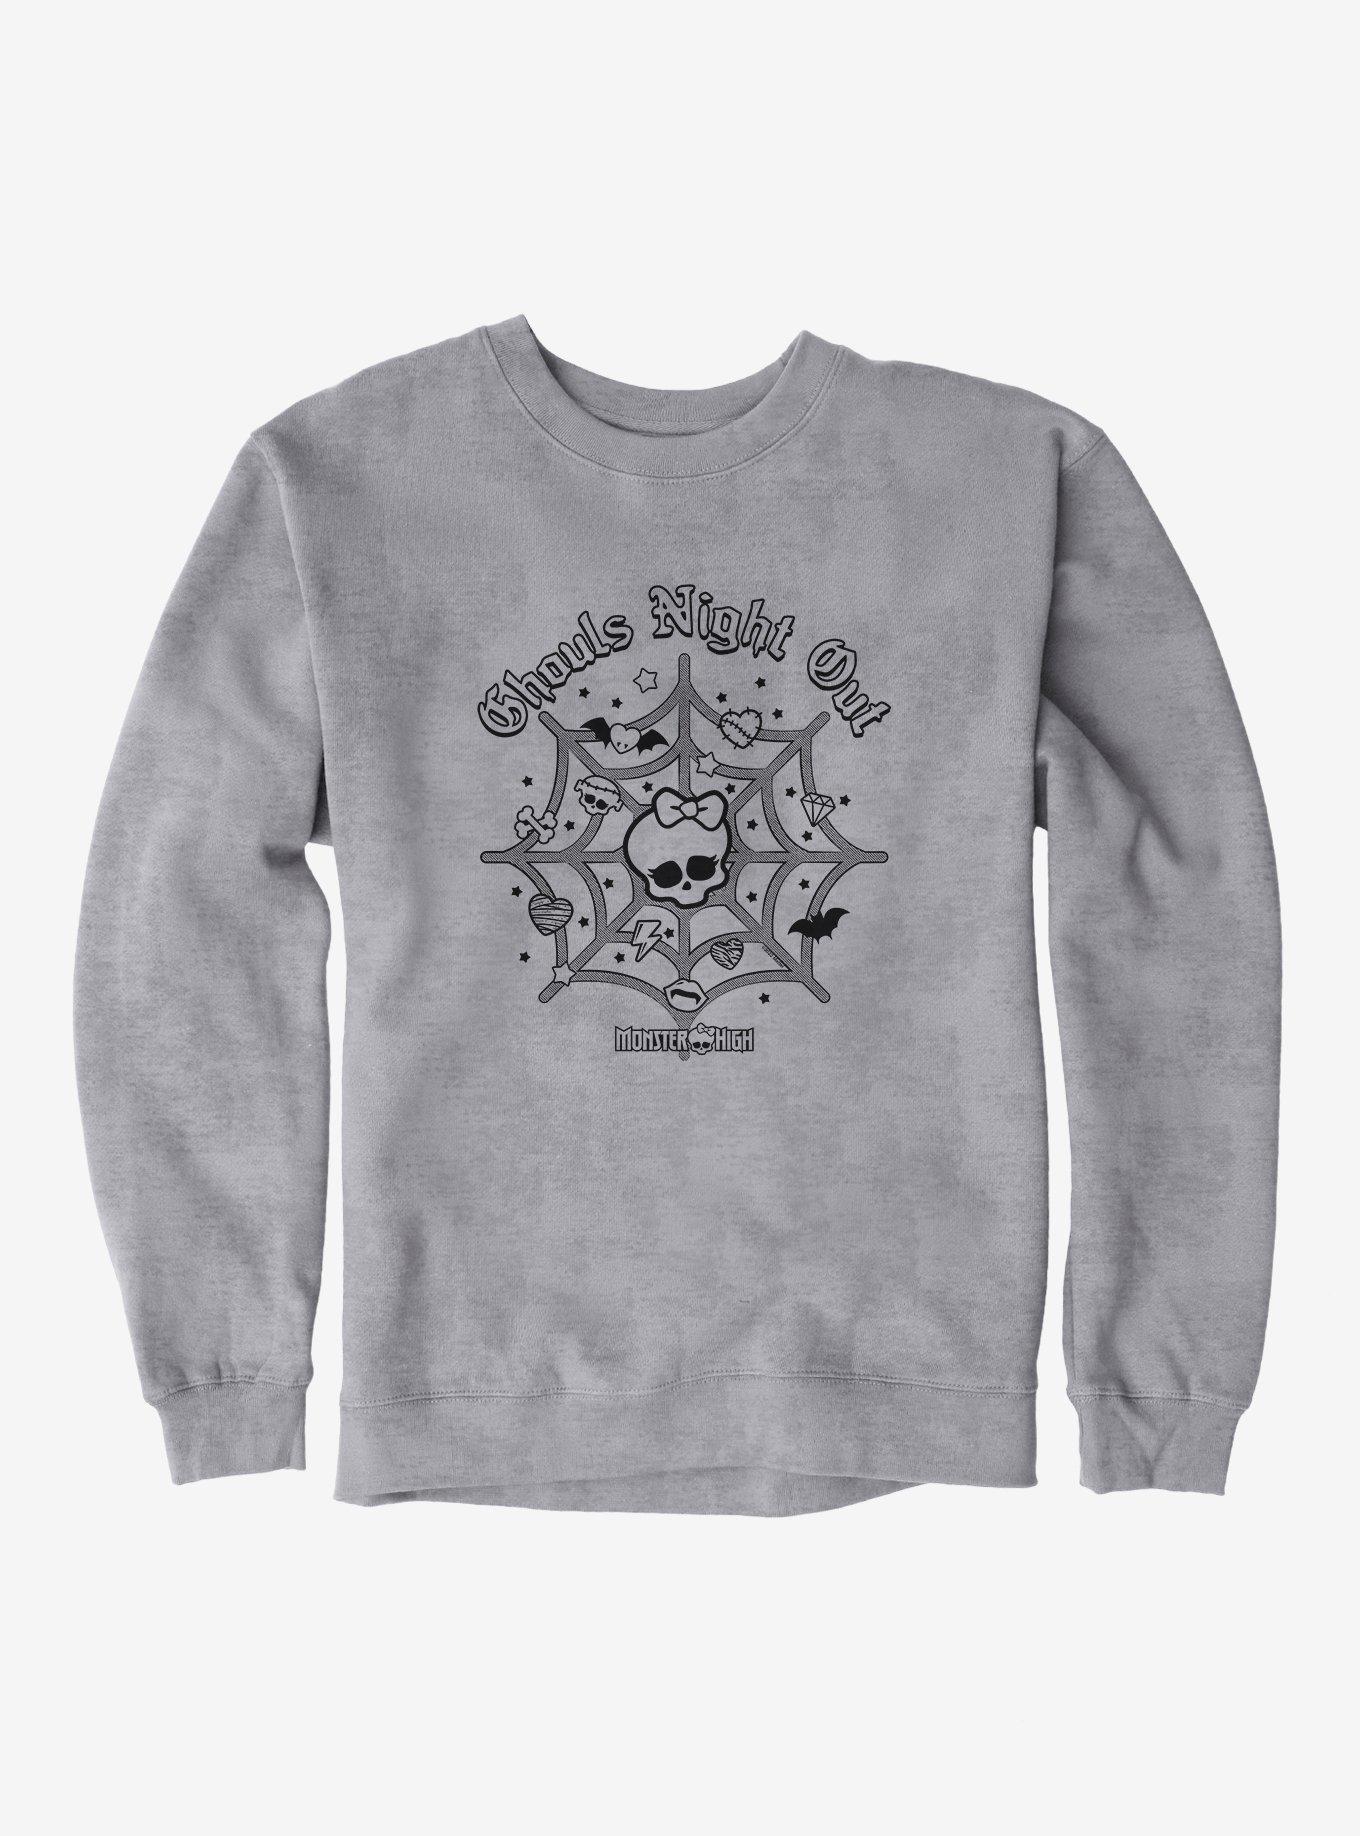 Monster High Ghouls Night Out Spiderweb Sweatshirt, HEATHER GREY, hi-res